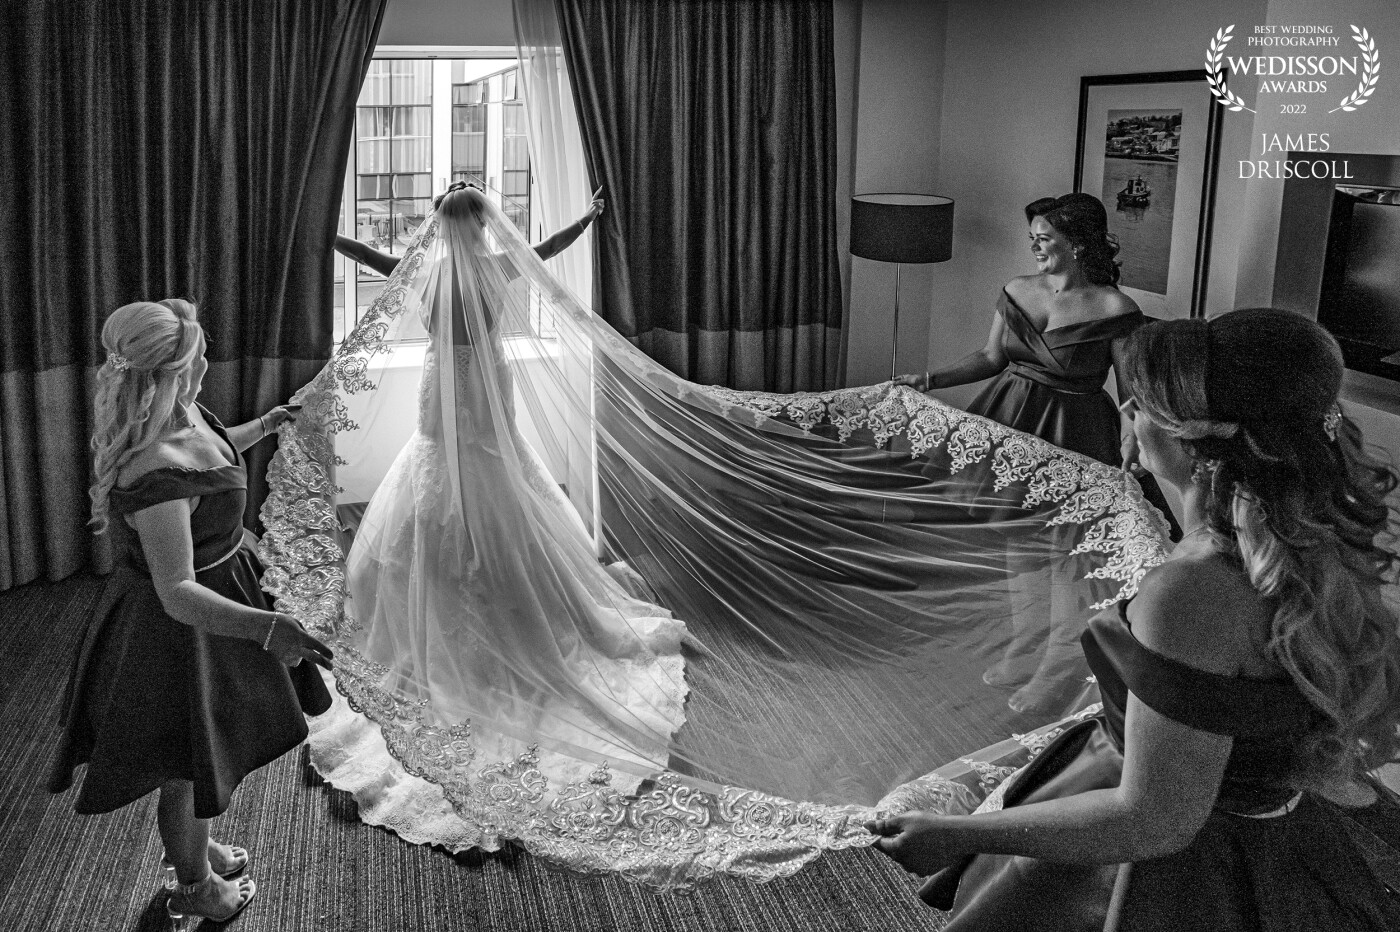 Lynsey, had this amazing veil for her wedding. It was too heavy to be able to throw up or create the swooping veil style image. So while the bridesmaid were fixing the veil into place for another image i had in mind, i quickly took this image and was delighted with the outcome when i loaded it into lightroom.